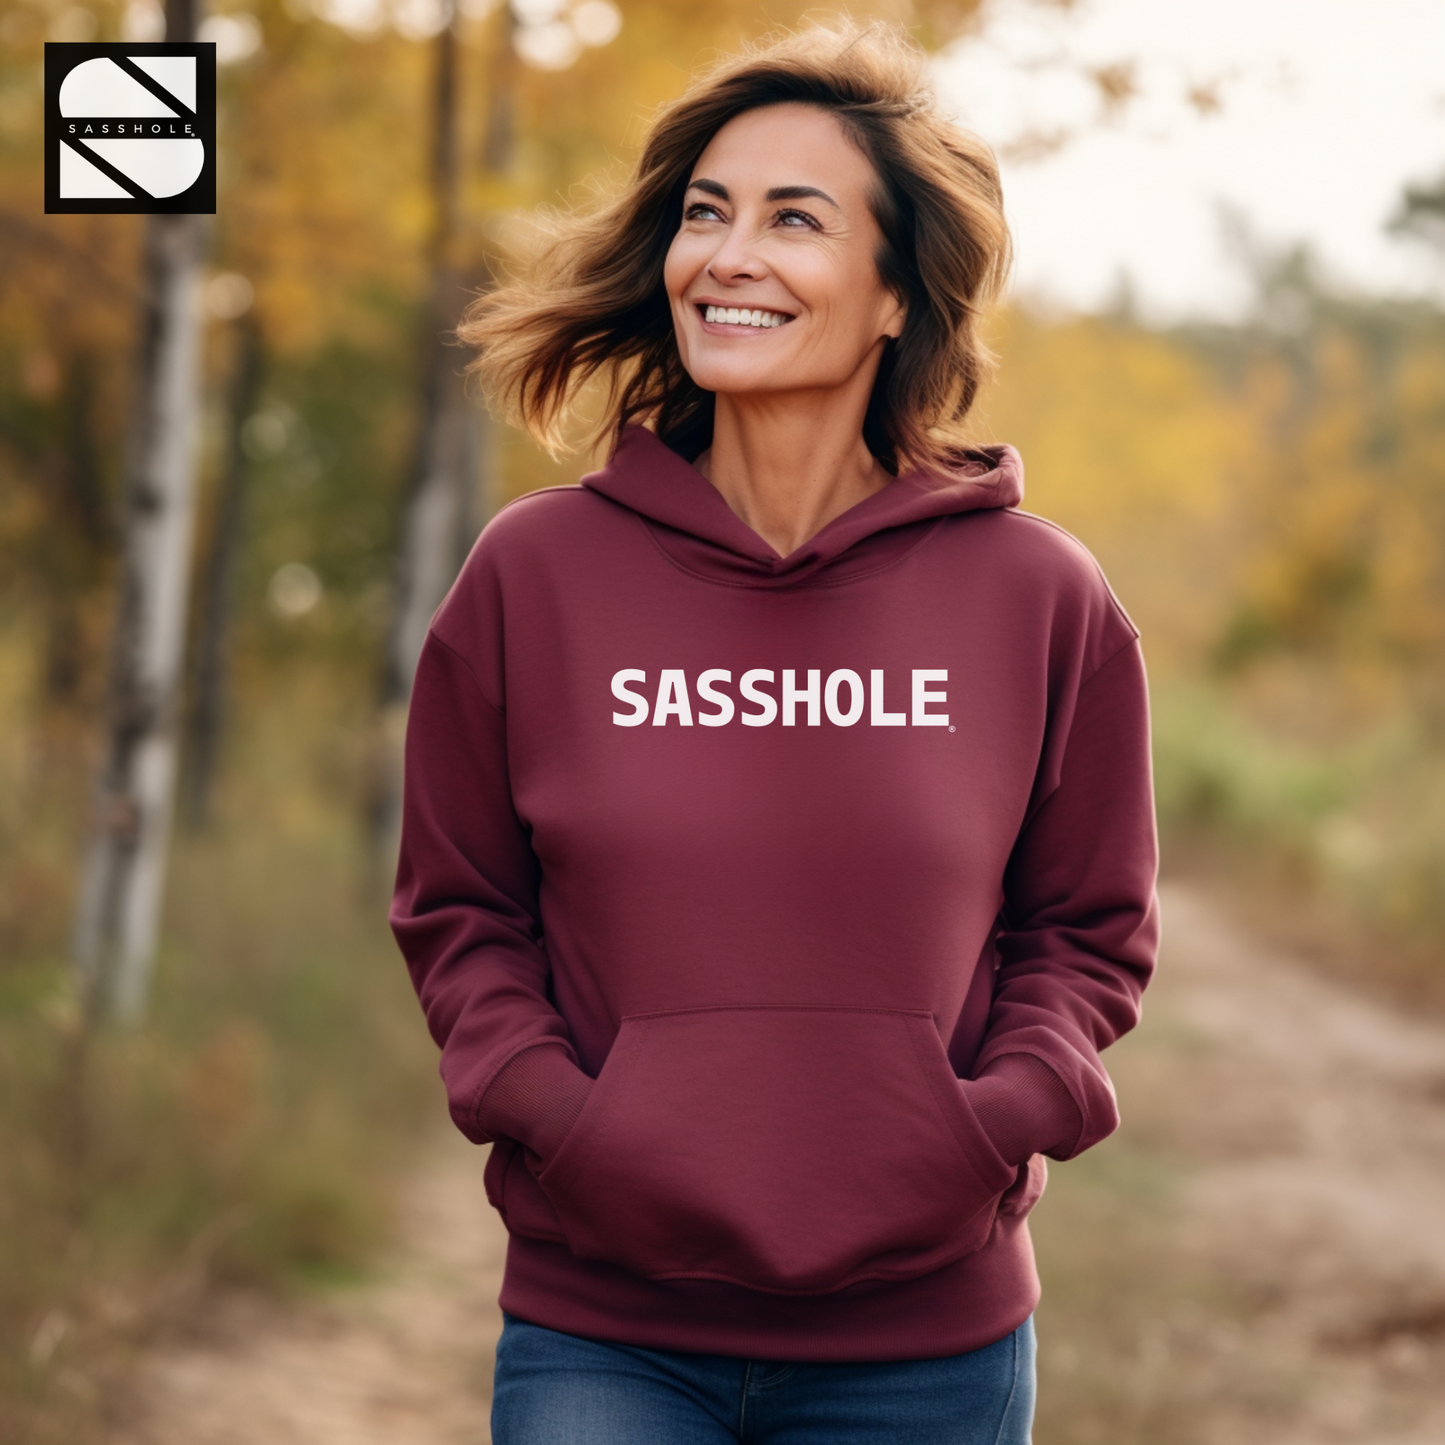 womens pullover hoodie, womens oversized pullover hoodie, womens hoodies, womens hoodie, womens graphic pullover hoodies, womens fleece pullover hoodies, womens black hoodie pullover, womens black hoodie, women's pullover hoodies, women's pullover, women's hoods, women's hooded sweatshirts, women's hooded sweatshirt, Women's Clothing, women's casual wear, women's black graphic hoodie, women hoodies, women hoodie, witty wardrobe, witty slogan hoodie